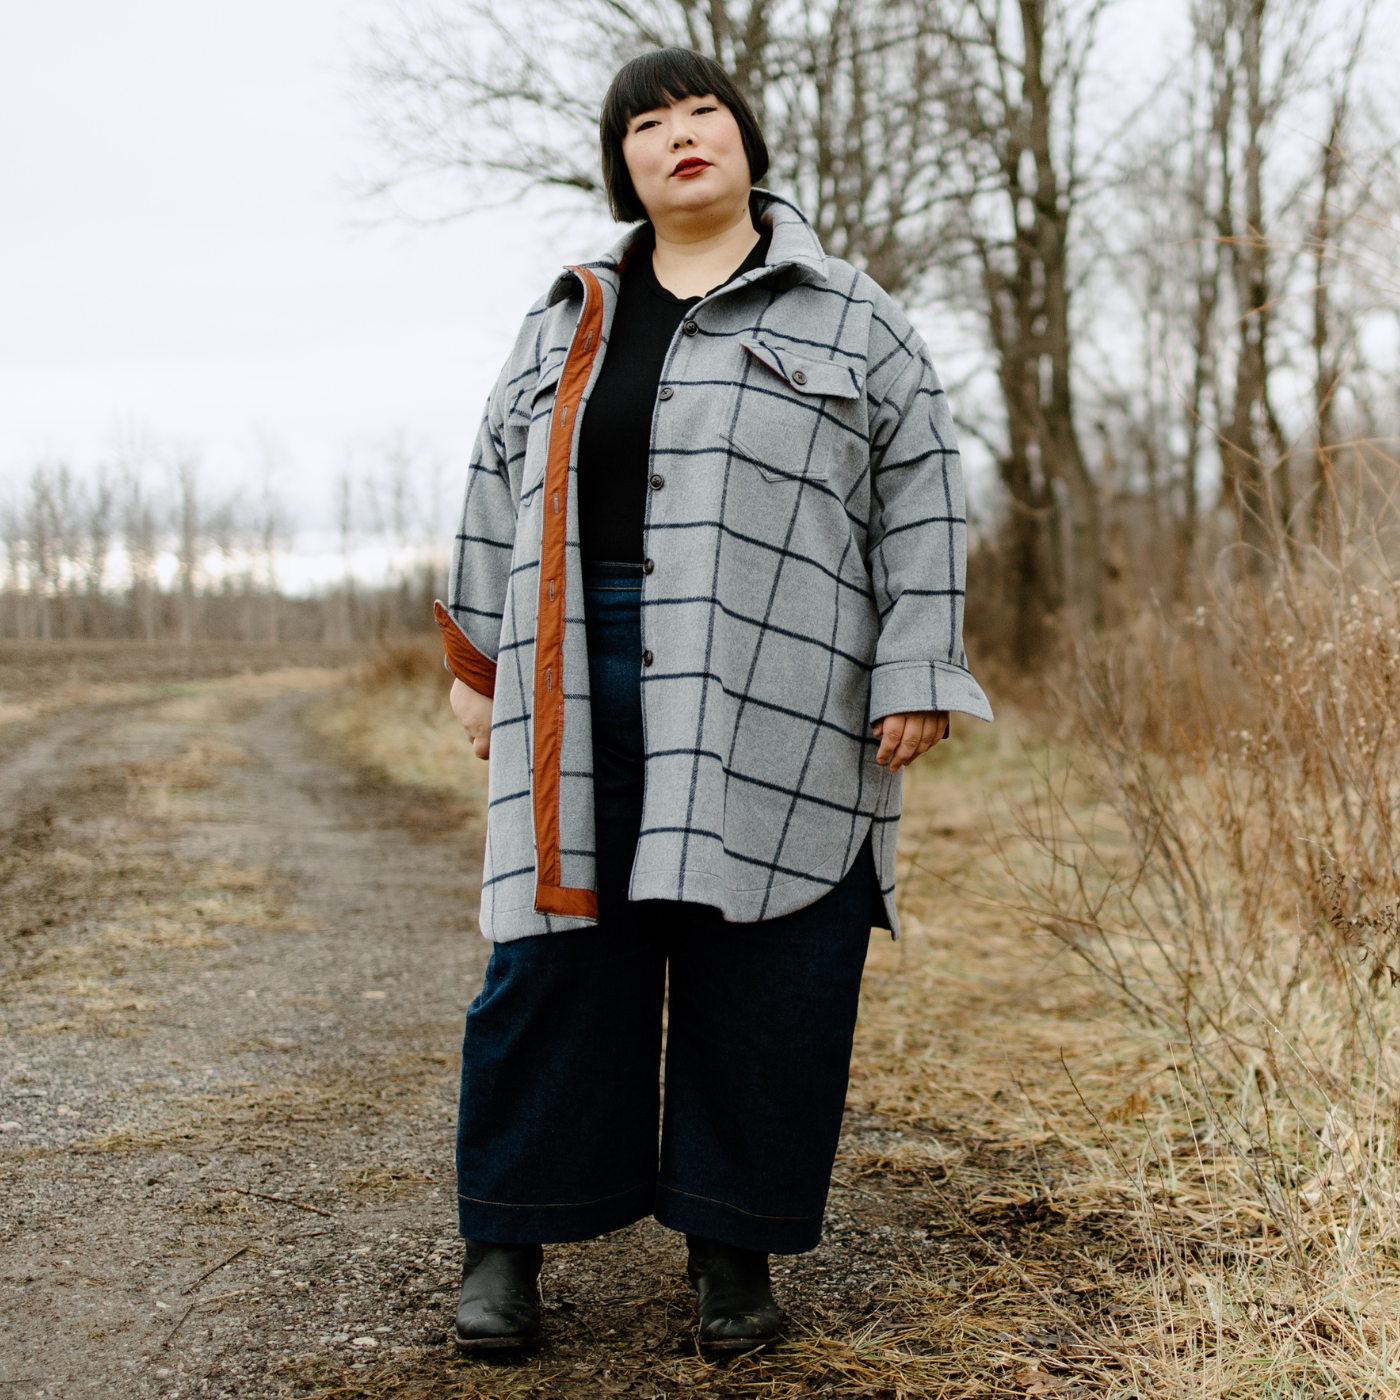 Leila stands looking at the camera and at the edge of a gravel road. She is wearing a gray coat unbuttoned with vertical and horizontal black stripes. The inside button band of the jacket is dark orange. Underneath the jacket she is wearing a black shirt and dark blue wide-leg pants.